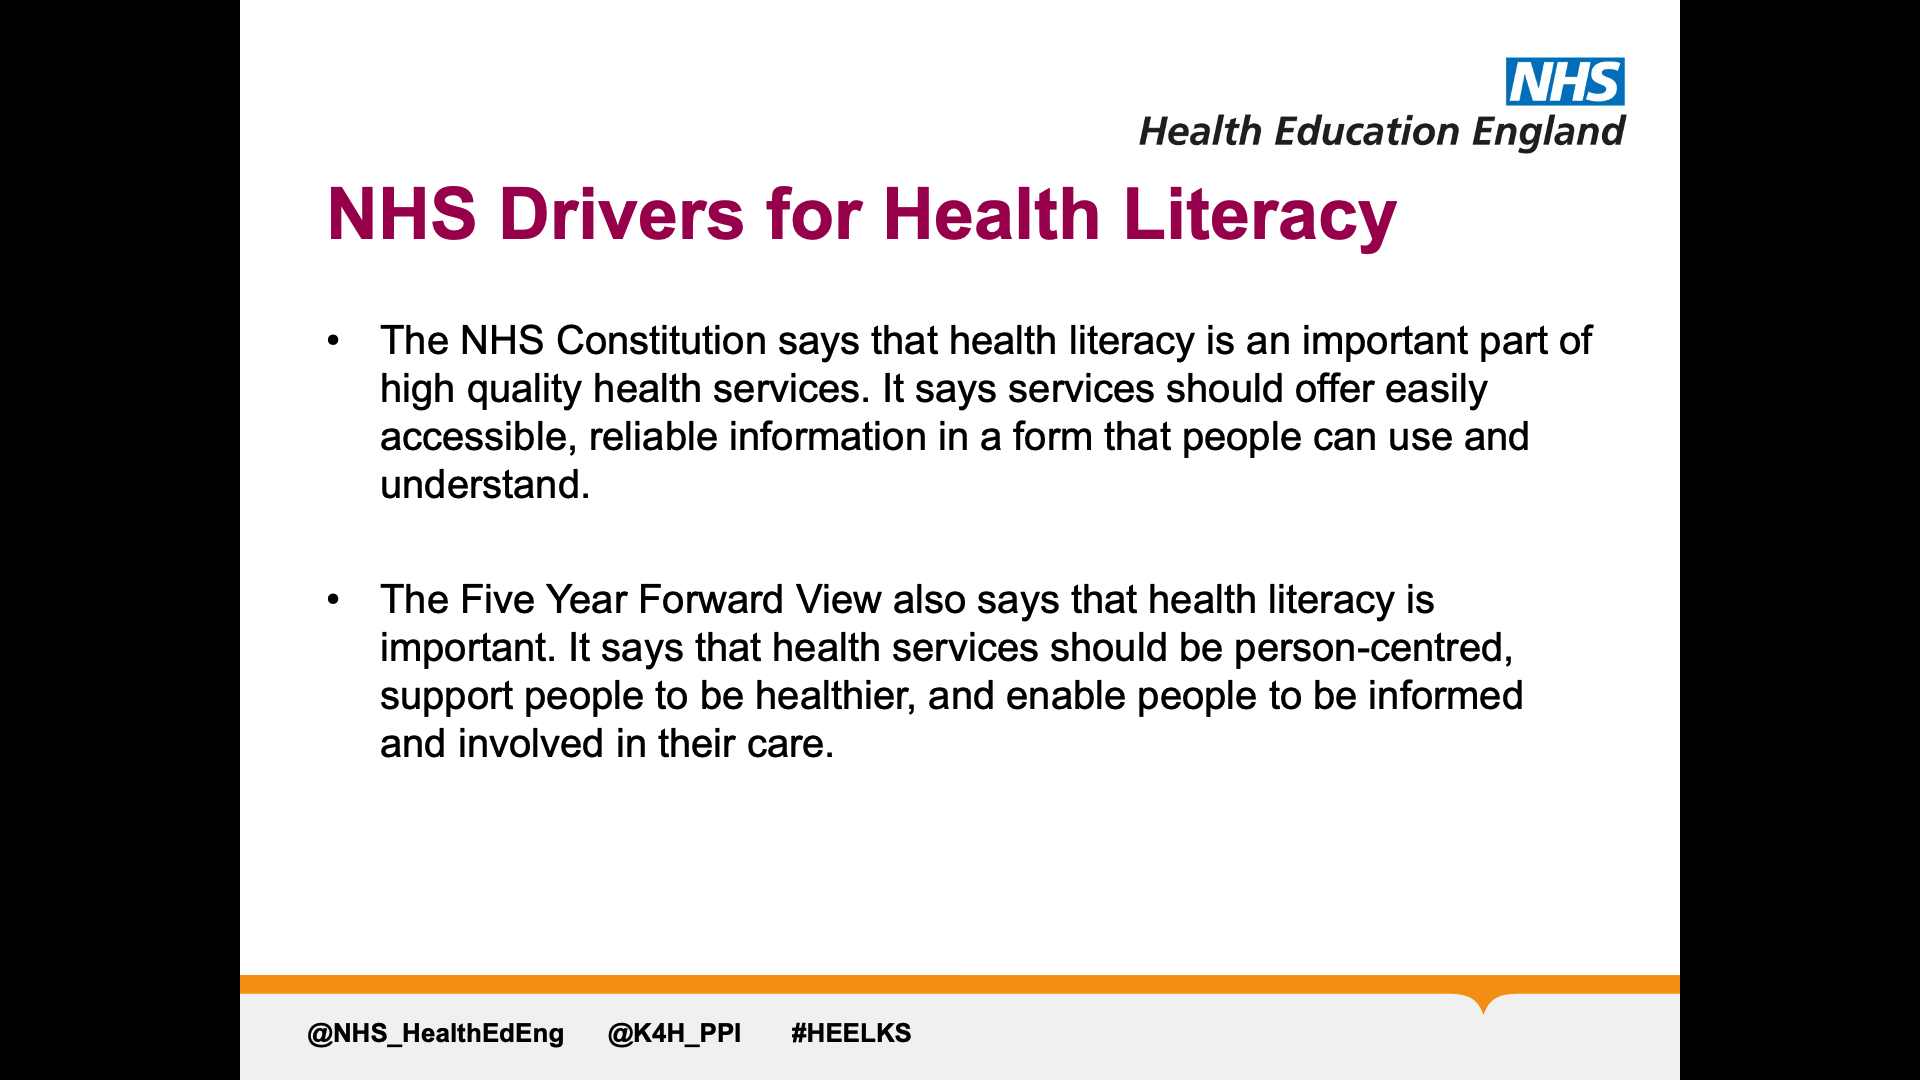 Title: NHS Drivers for health literacy. Text on page: 1. The NHS Constitution says that health literacy is an important part of high quality health services. It says services should offer easily accessible, reliable information in a form that people can use and understand. 2. The Five Year Forward View also says that health literacy is important. It says that health services should be person-centred, support people to be healthier, and enable people to be informed and involved in their care.